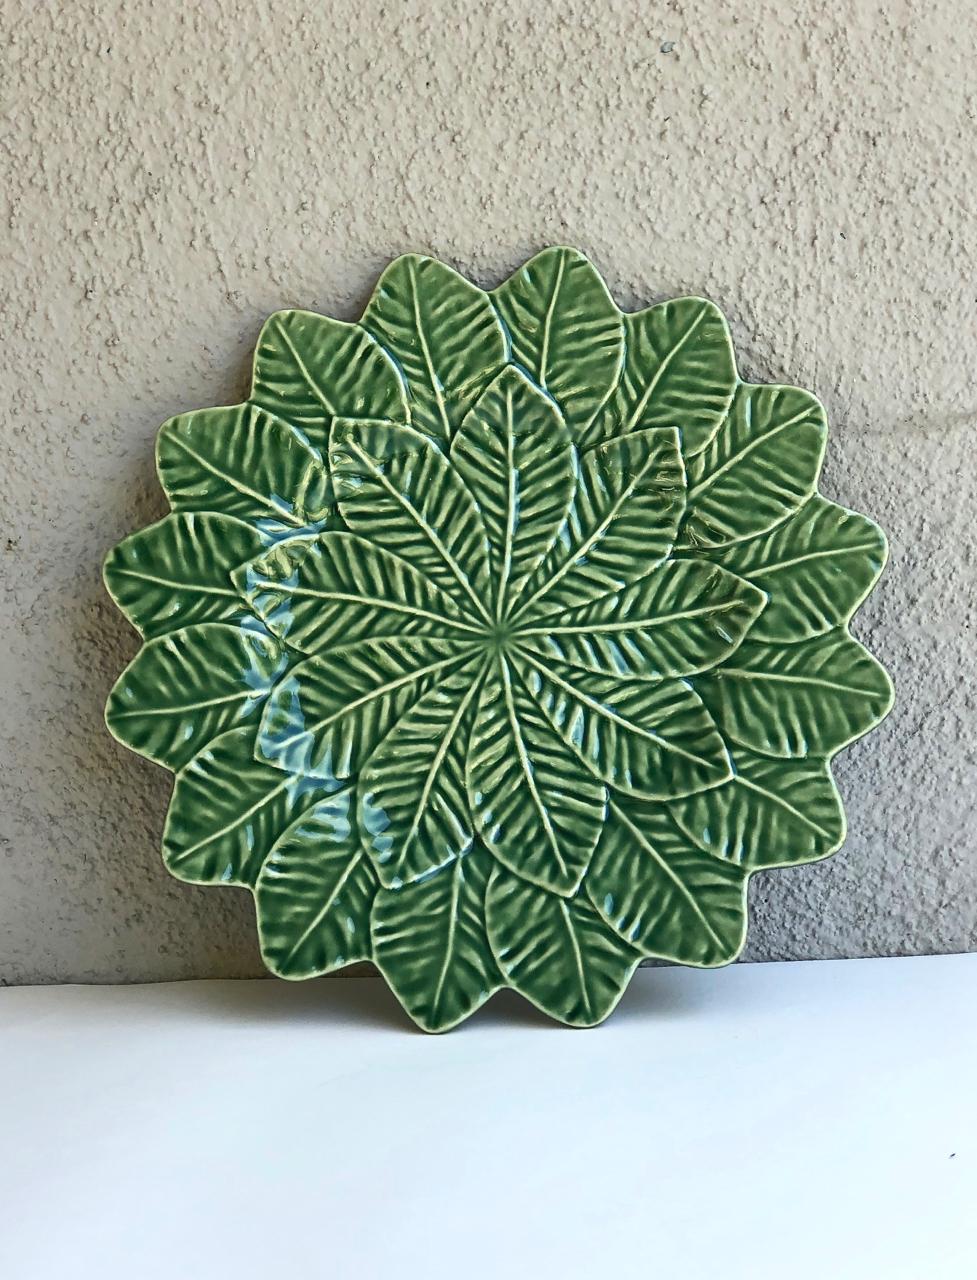 This is an outstanding set of 12 mid-century Bordallo Piniero Portuguese Majolica double leaf incised dinner plates or chargers. The incised double leaf design and leaf-shaped edge of these plates mark them as outstanding works of ceramic art. All